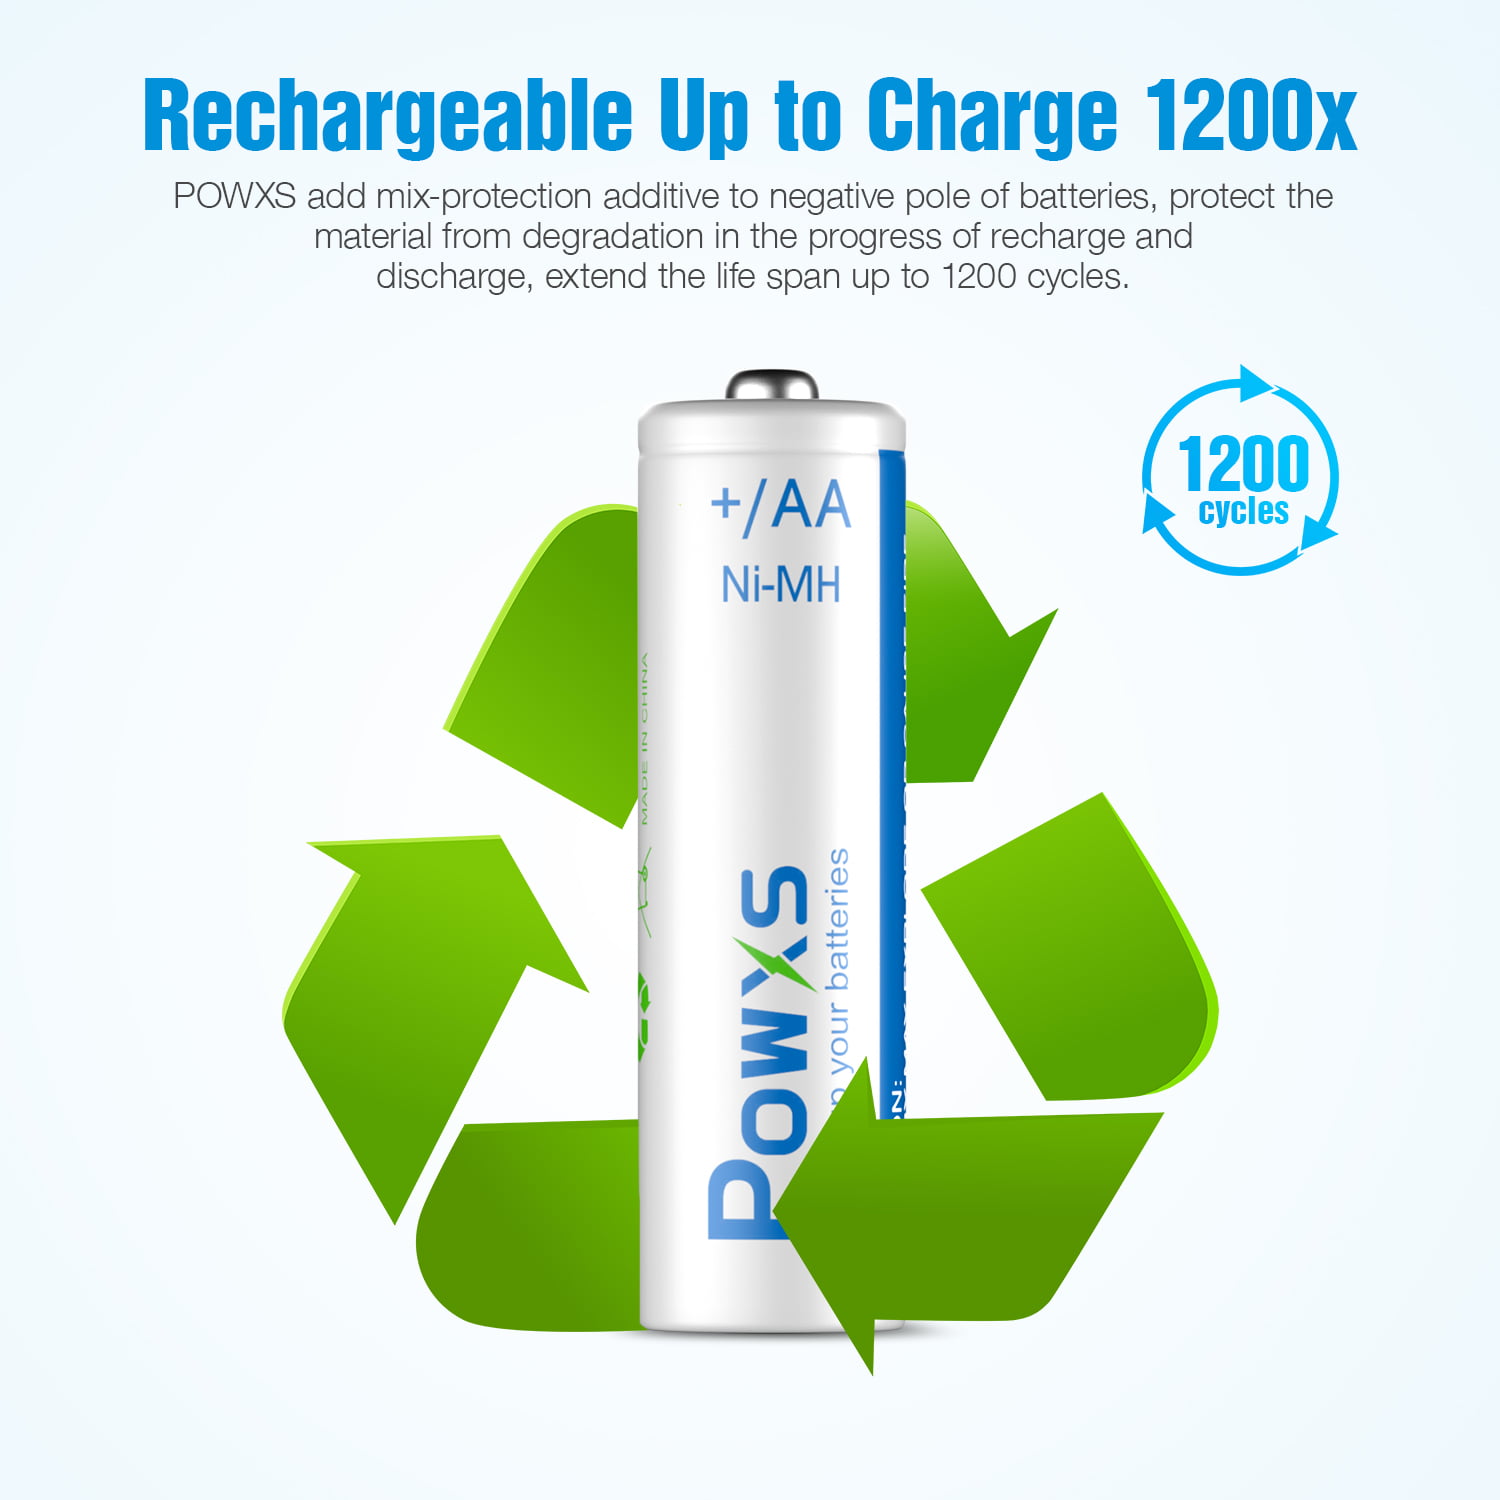 LDLC+ NiMH AA - 4 piles rechargeables AA (HR6) 2000 mAh - Pile